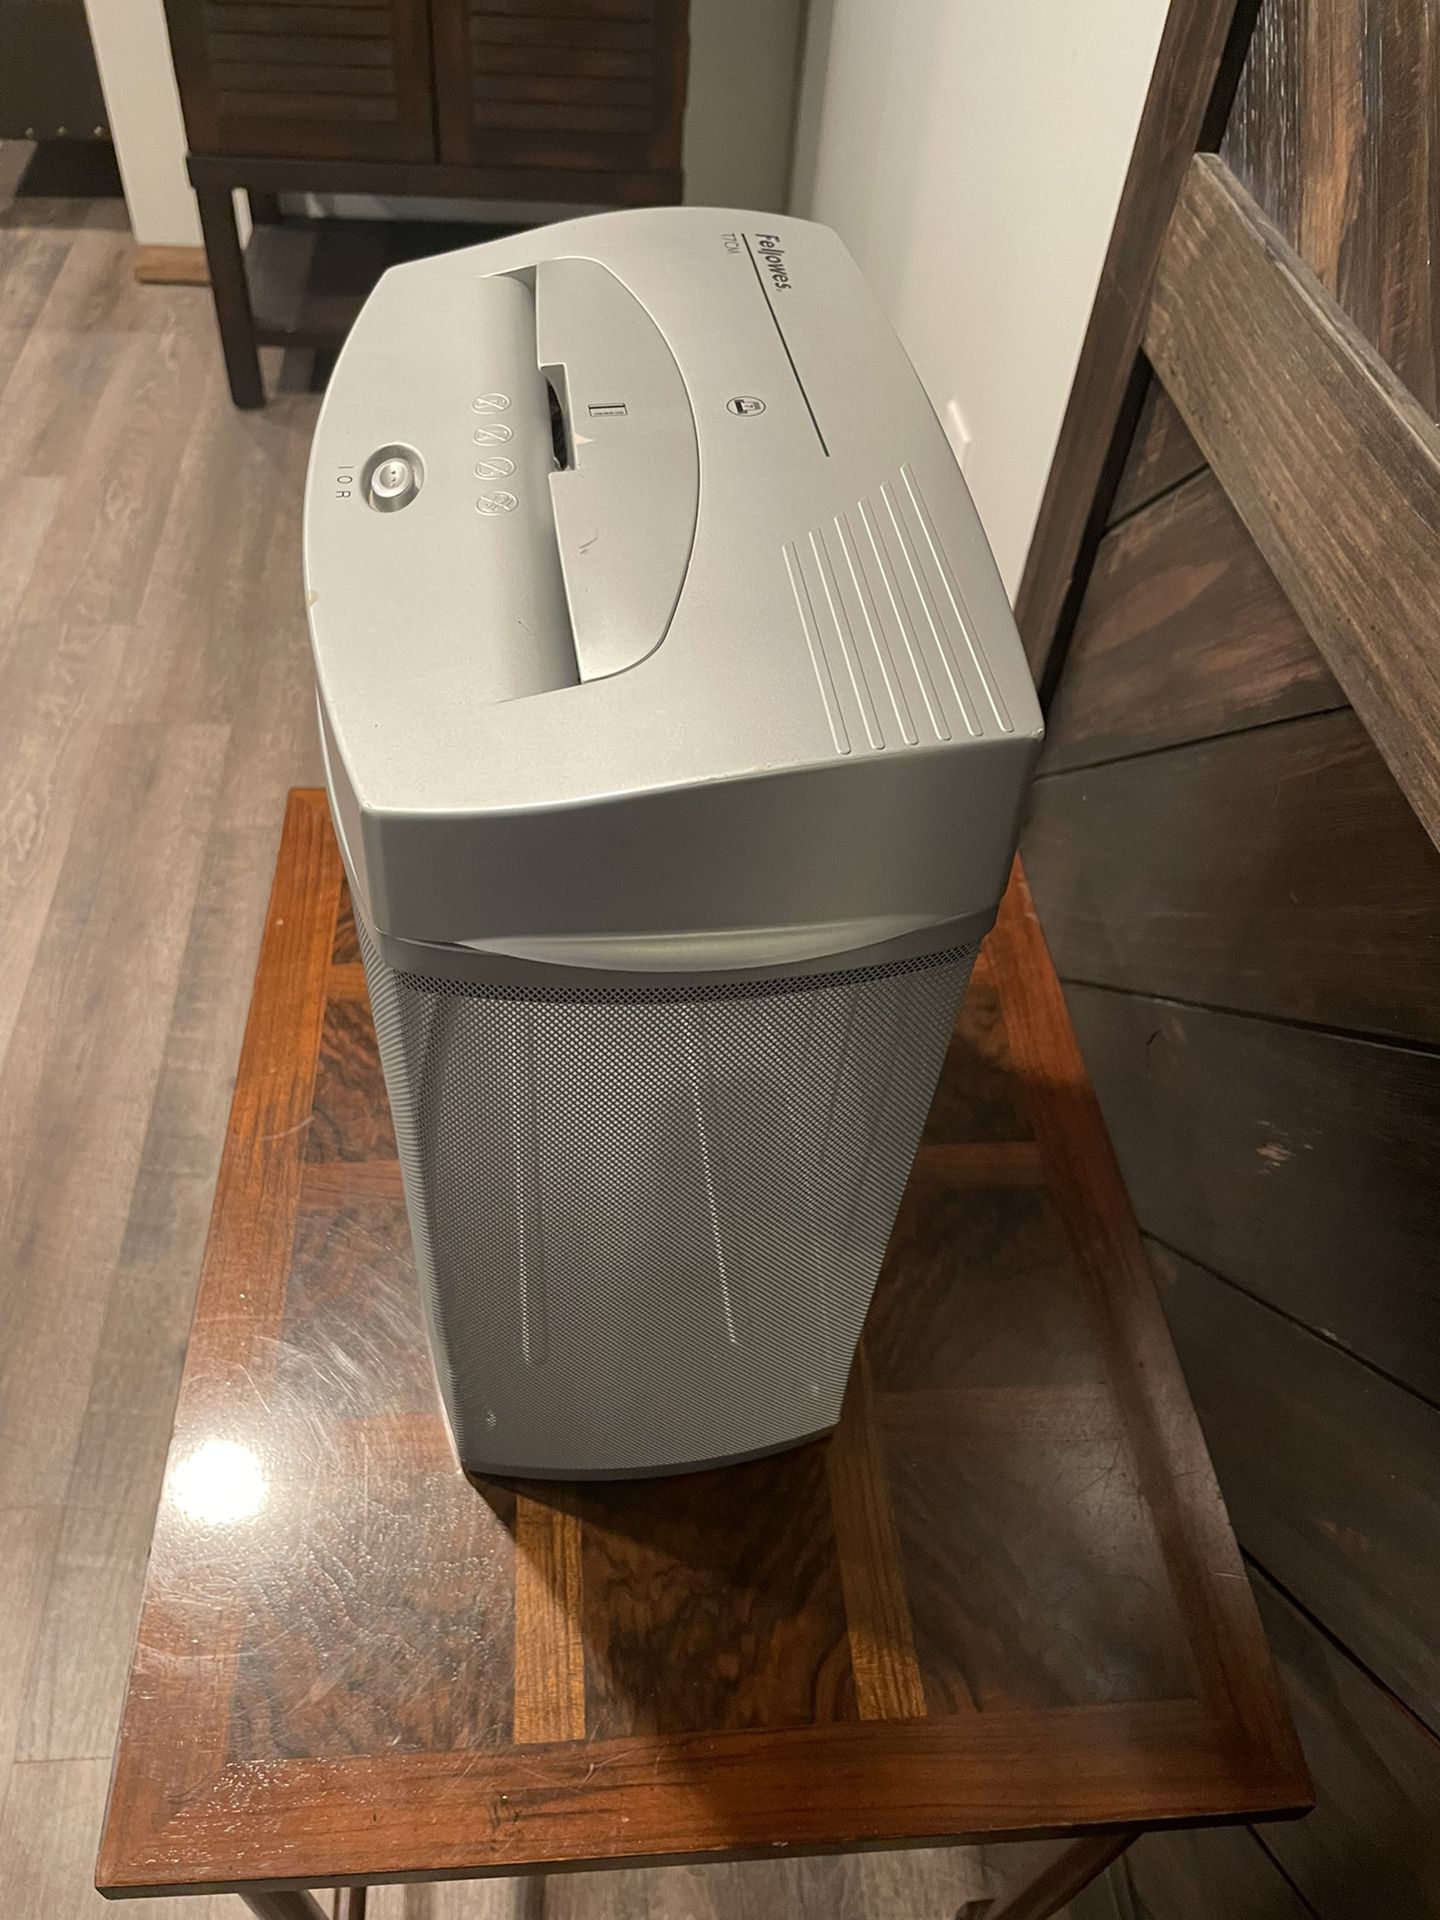 Used Fellows T7CM Personal Paper Shredder 